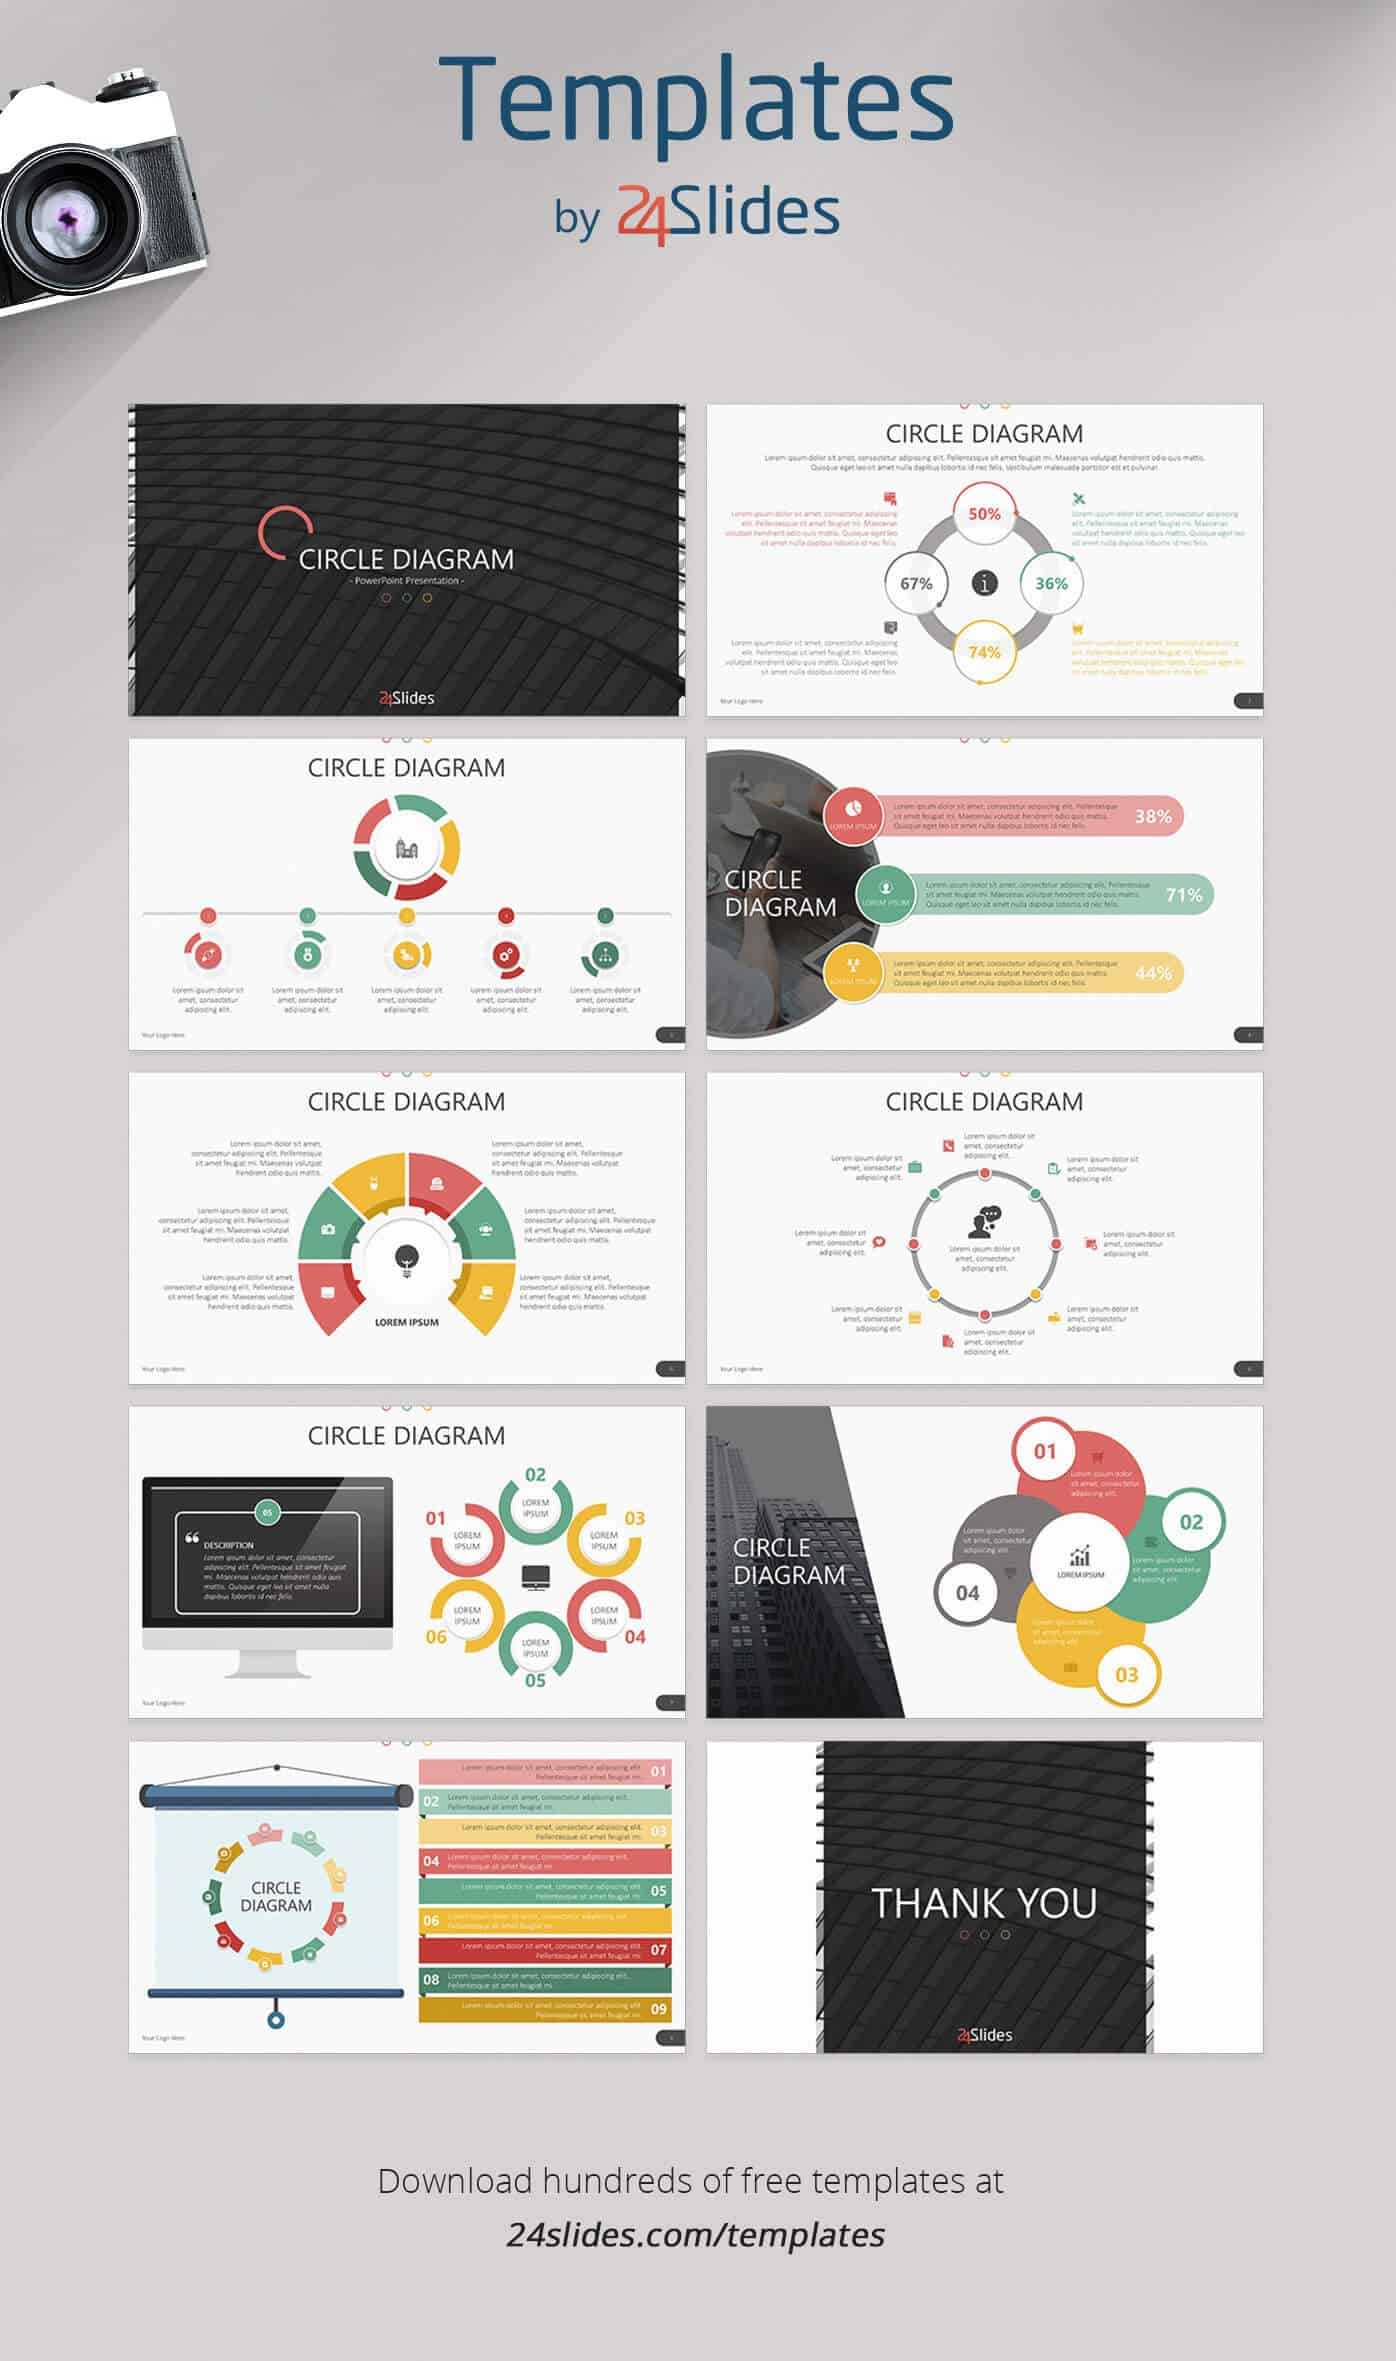 15 Fun And Colorful Free Powerpoint Templates | Present Better With Regard To Free Powerpoint Presentation Templates Downloads